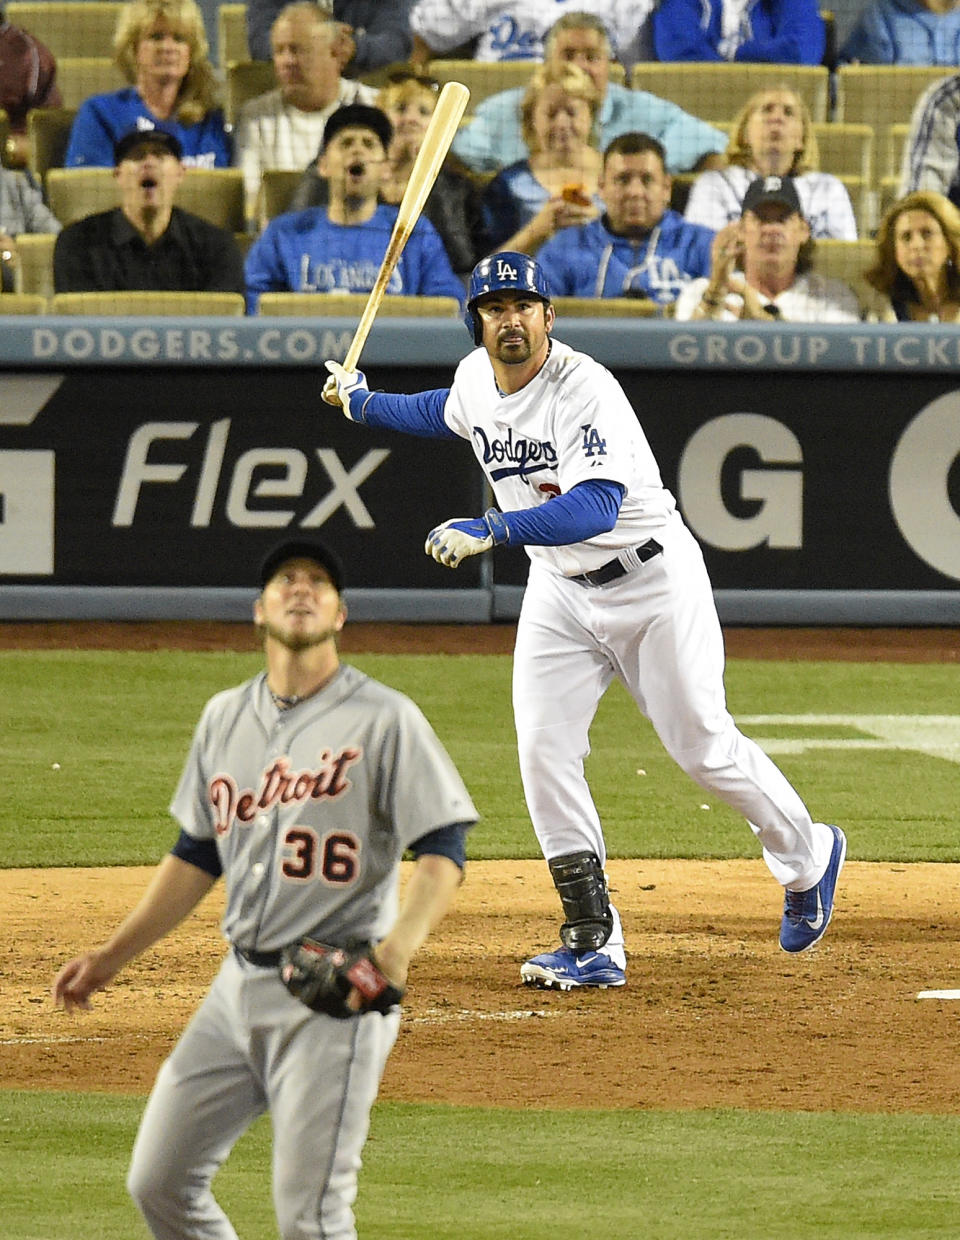 Los Angeles Dodgers' Adrian Gonzalez, right, hits a solo home run as Detroit Tigers relief pitcher Joe Nathan looks on during the ninth inning of a baseball game, Wednesday, April 9, 2014, in Los Angeles. (AP Photo/Mark J. Terrill)